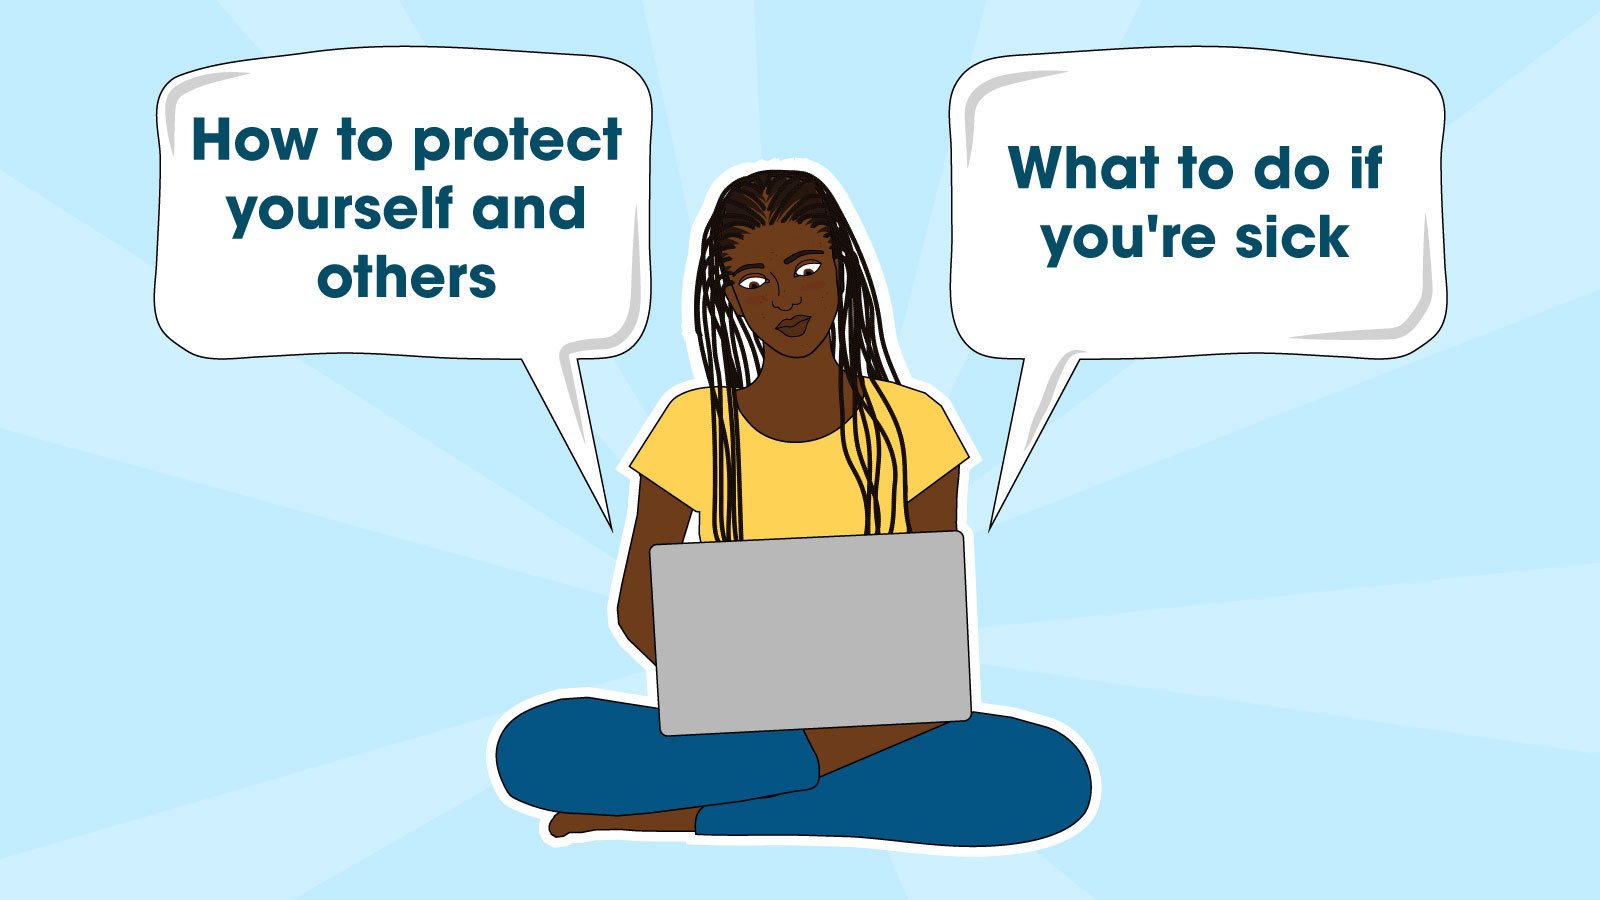 Illustration shows a young woman sitting on her laptop. The text bubbles read: "How to protect yourself and others" and "What to do if you're sick"